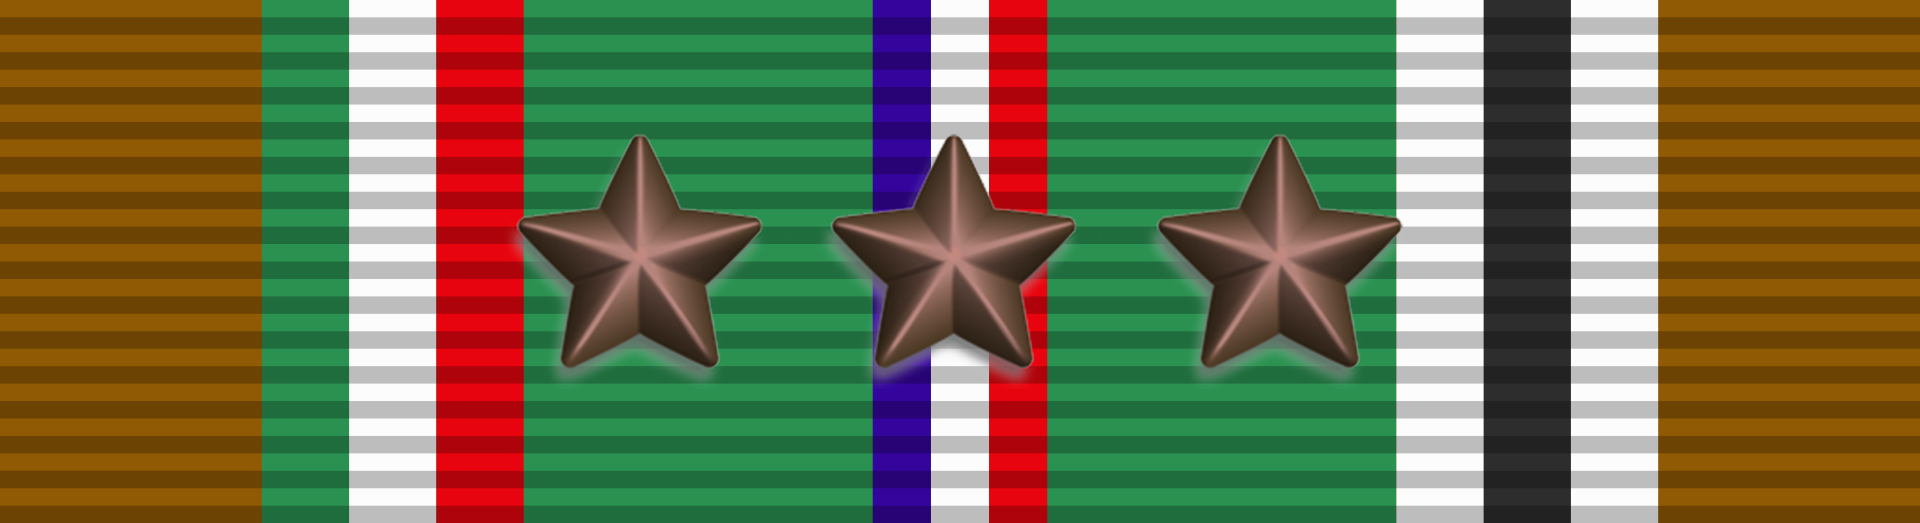 European African Middle Eastern Campaign Medal with three Bronze campaign stars